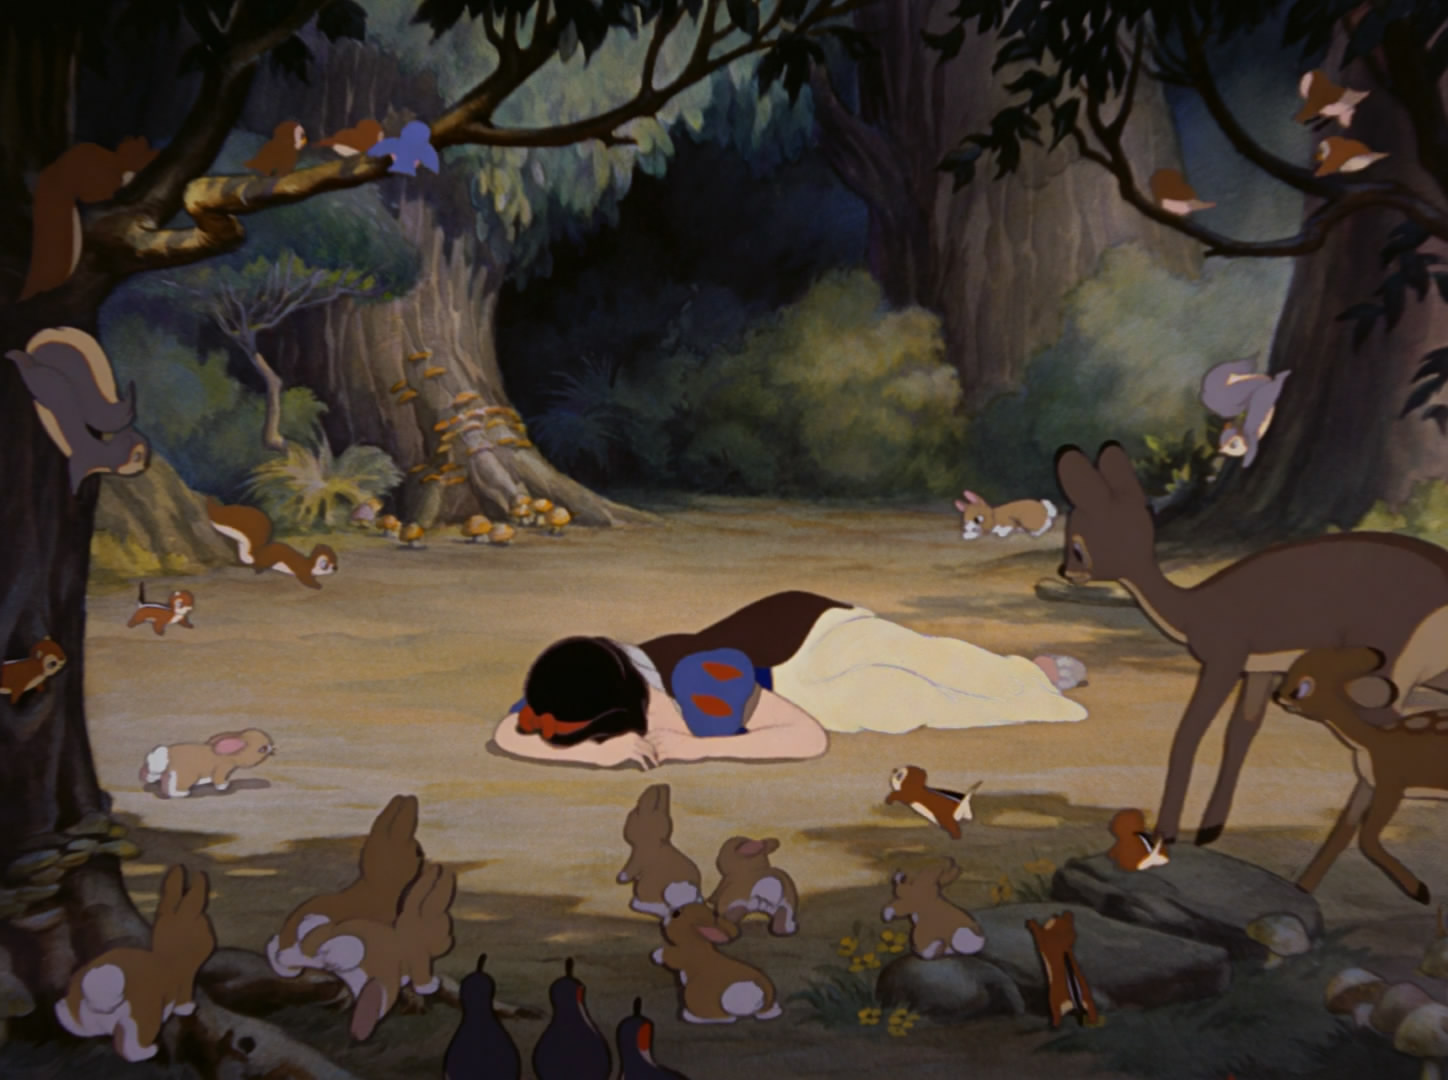 Snow white and the seven deadly sins essay